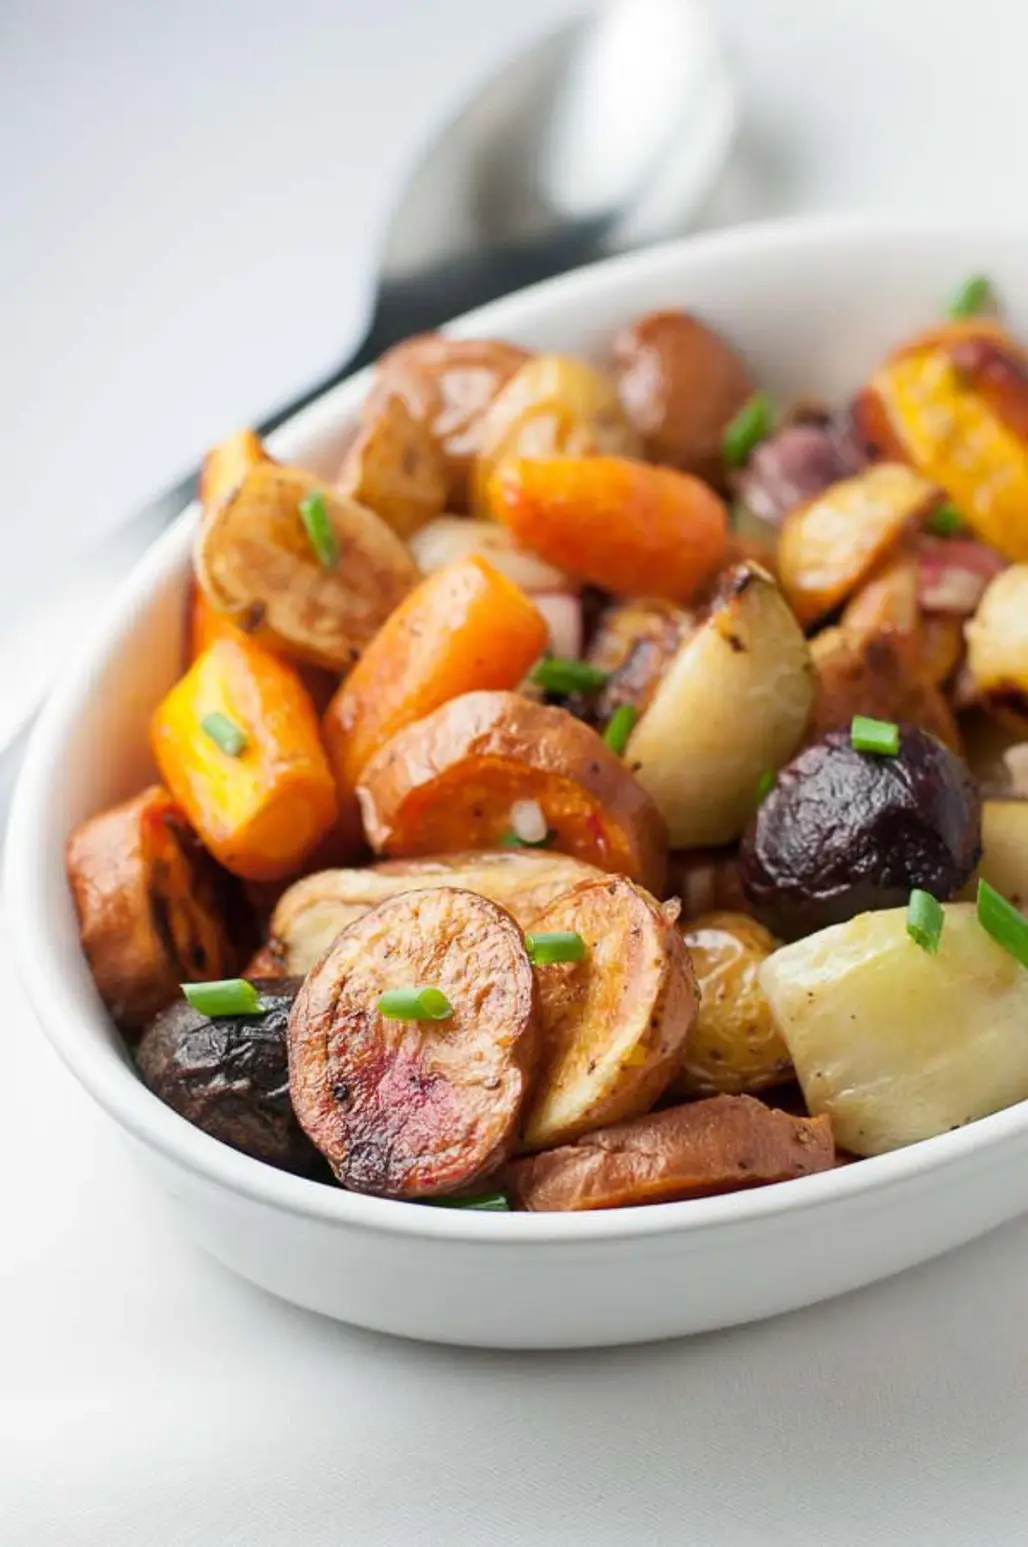 Roasted Root Veggies, Perfect for Any Holiday